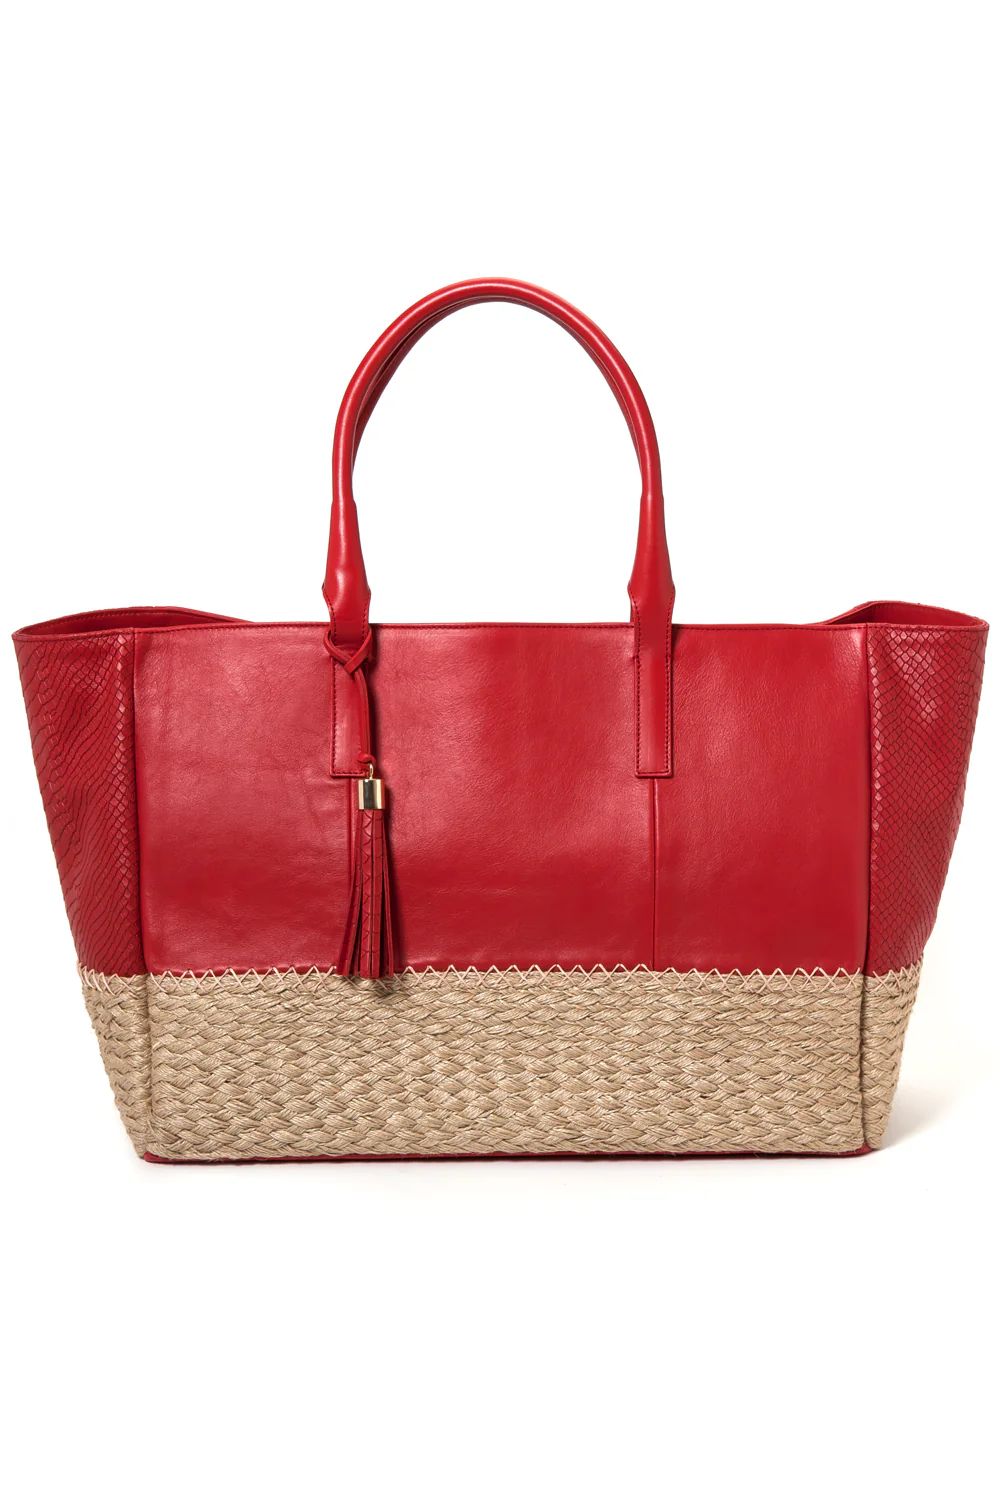 'Ellis' Tote in Red Leather And Espadrille | Mel Boteri